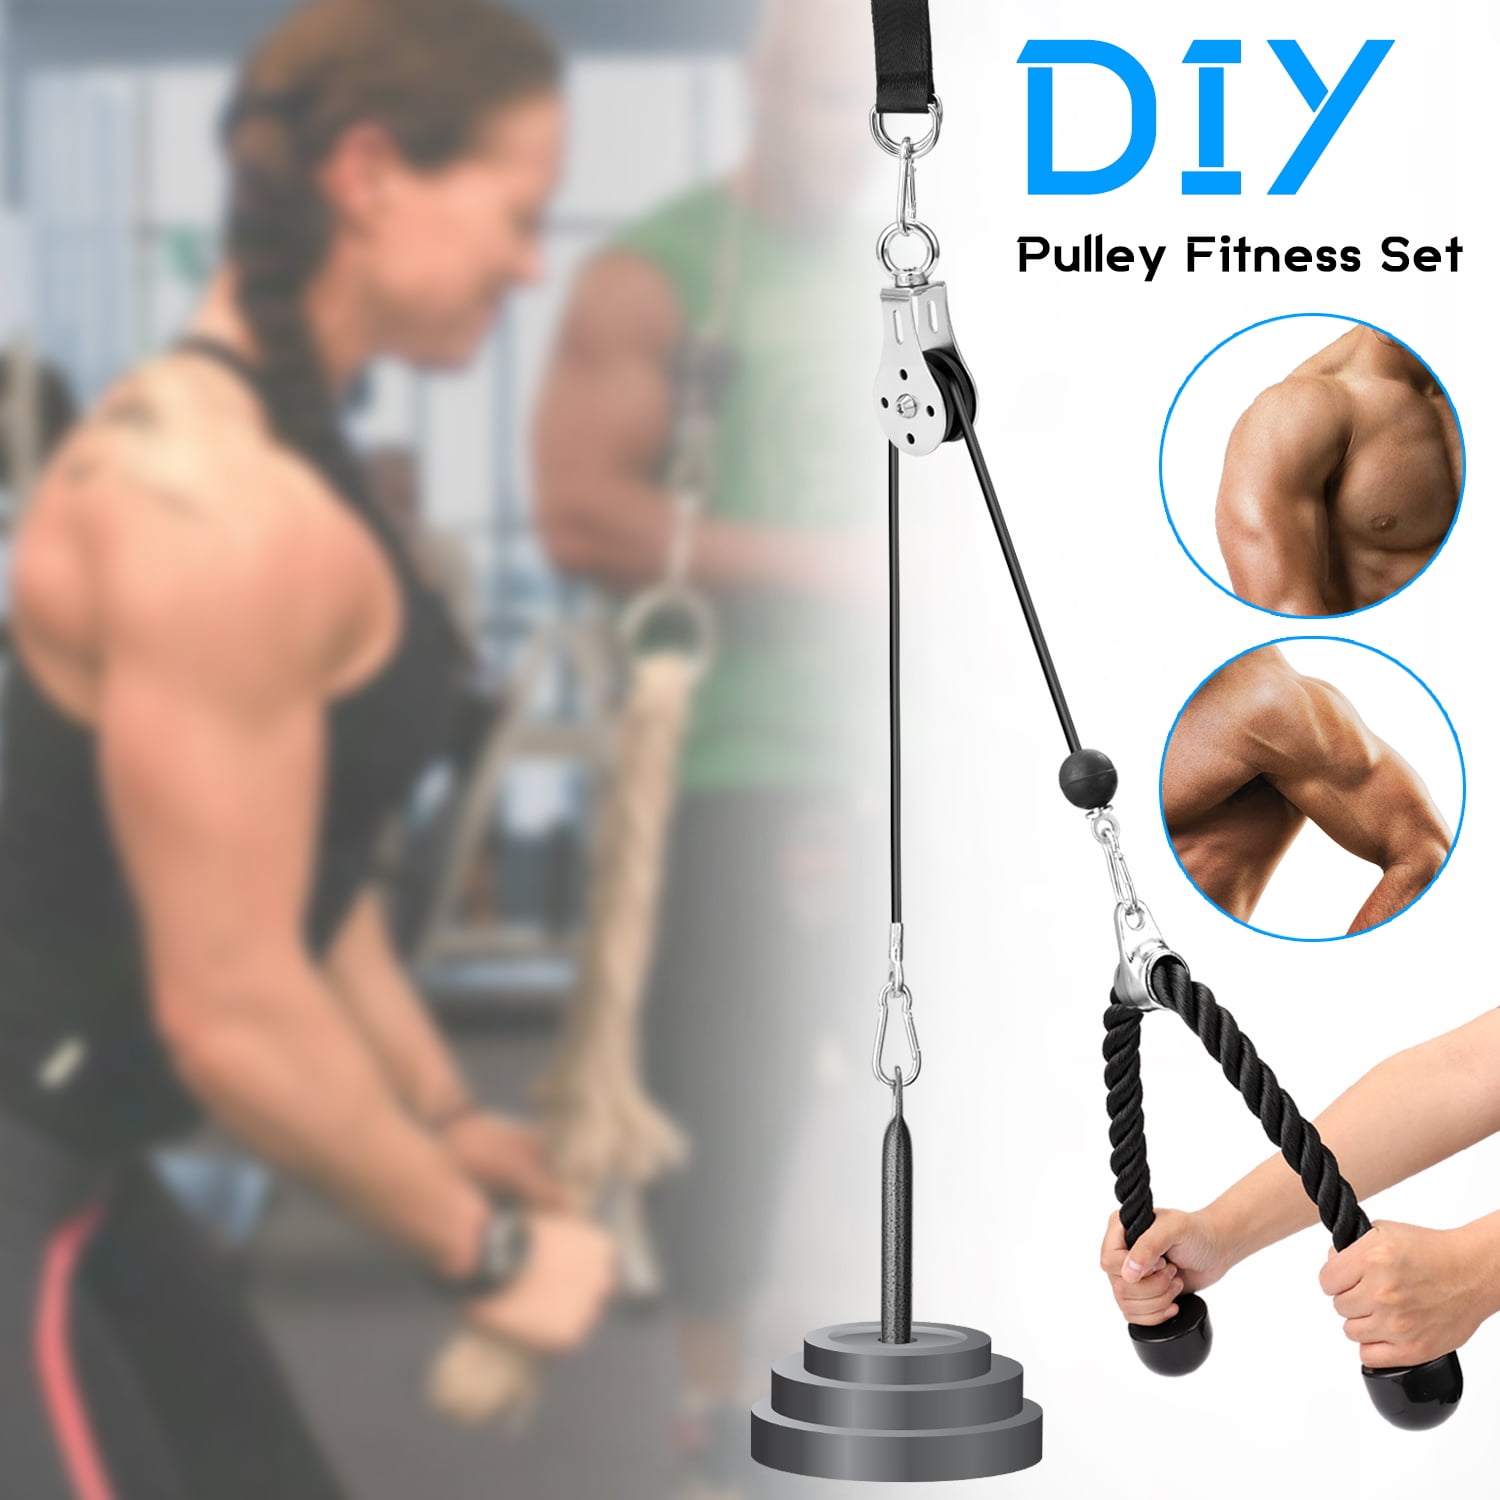 Fitness DIY Gym Pulley Cable Machine Attachment Set Loading Pin Lifting Workout 